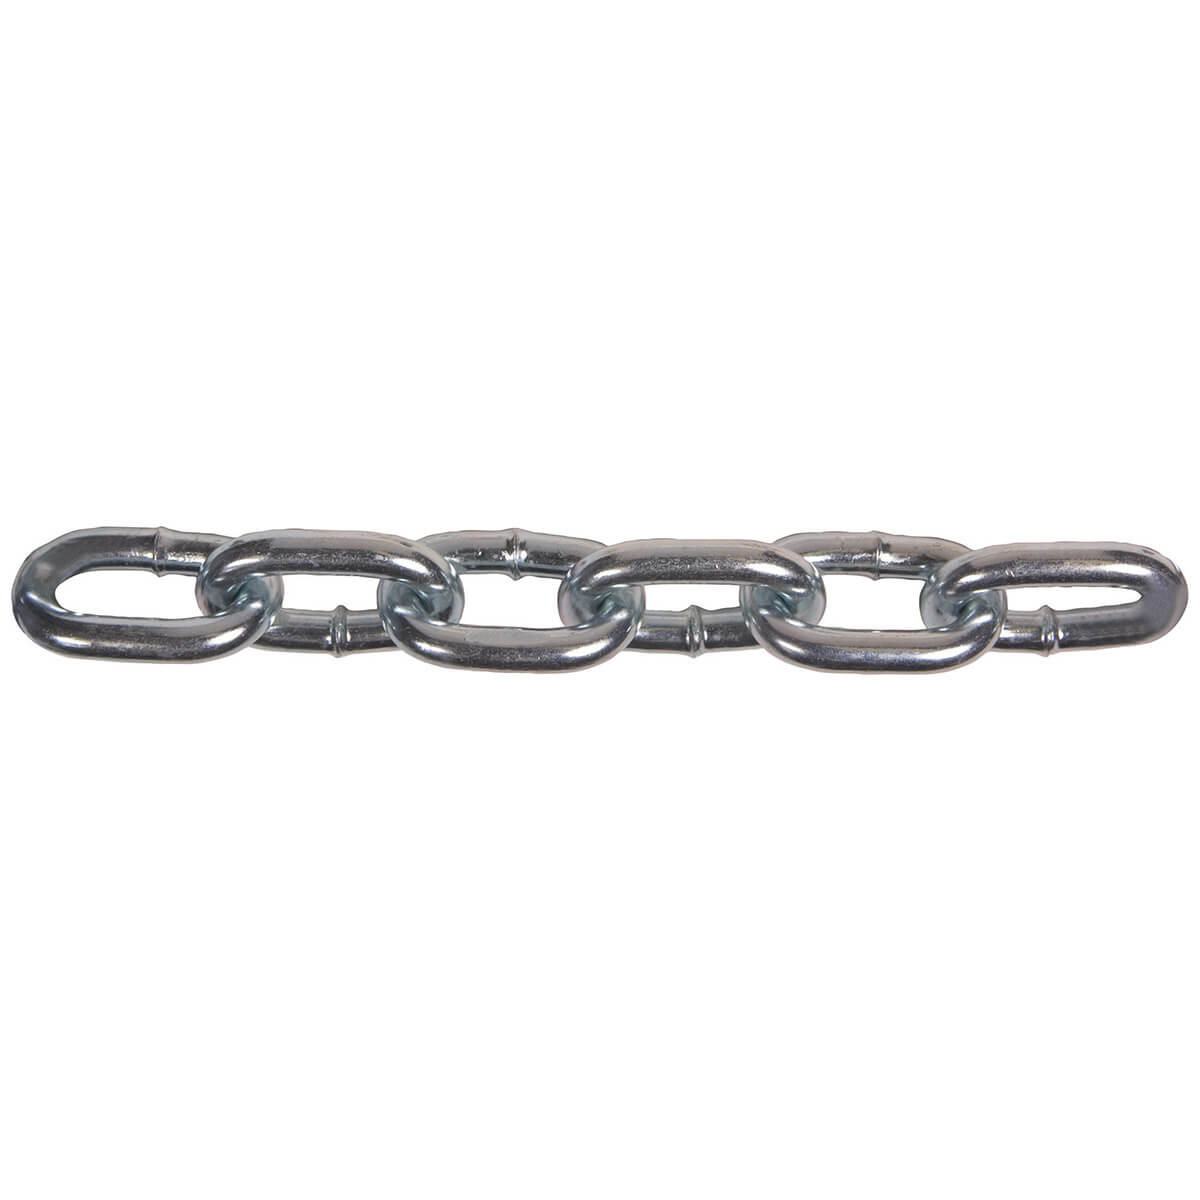 5/16" Utility Chain, Zinc Plated